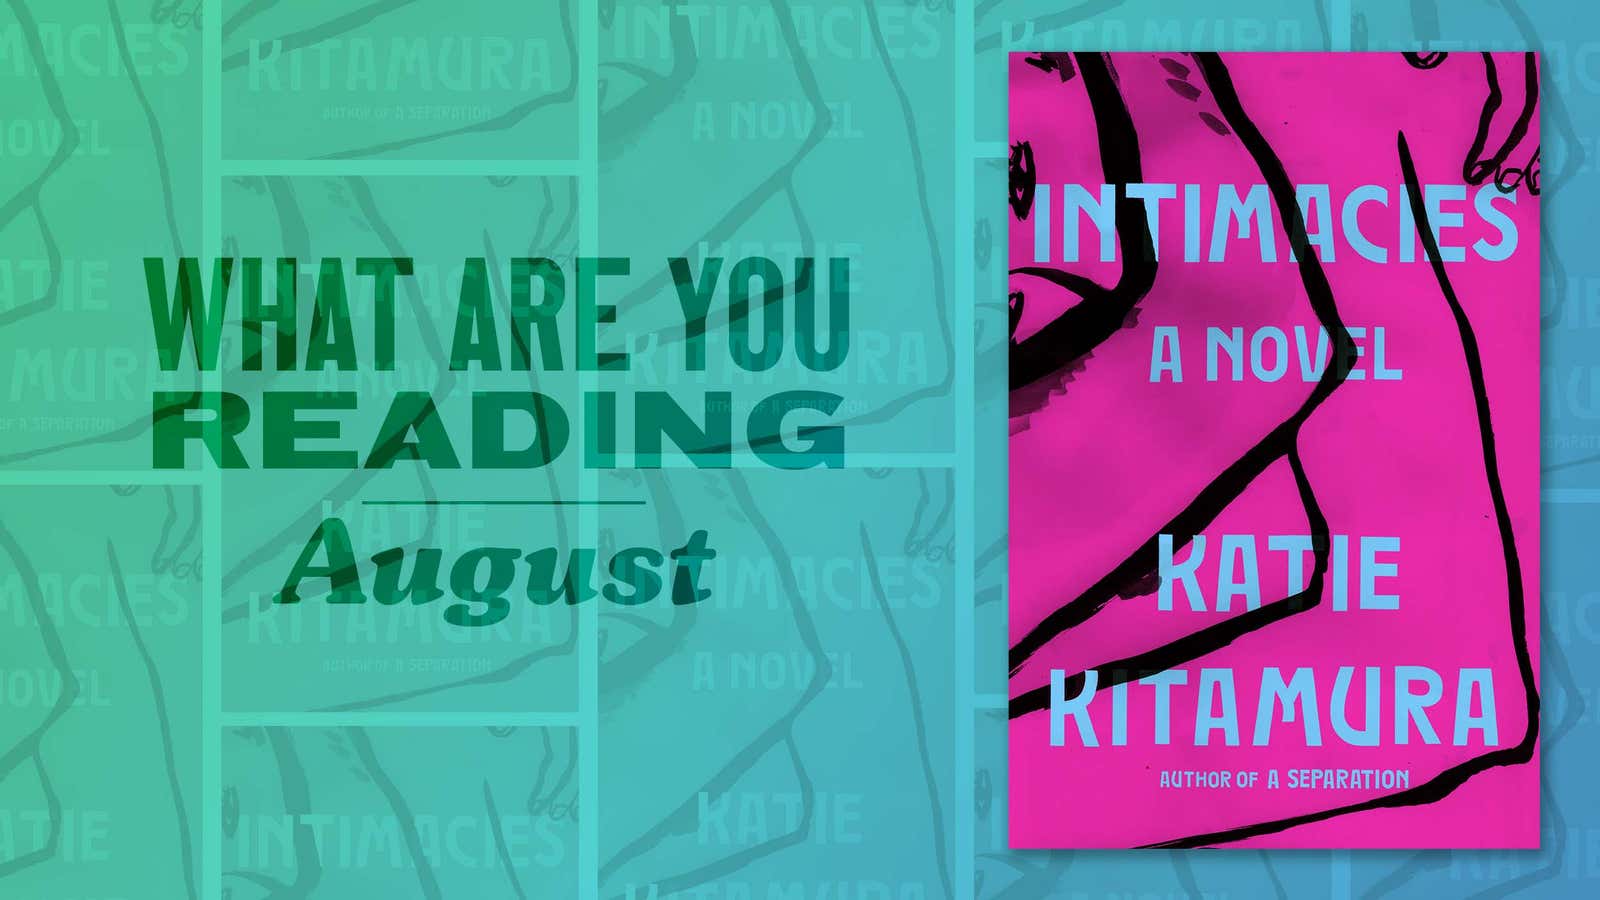 What are you reading in August?